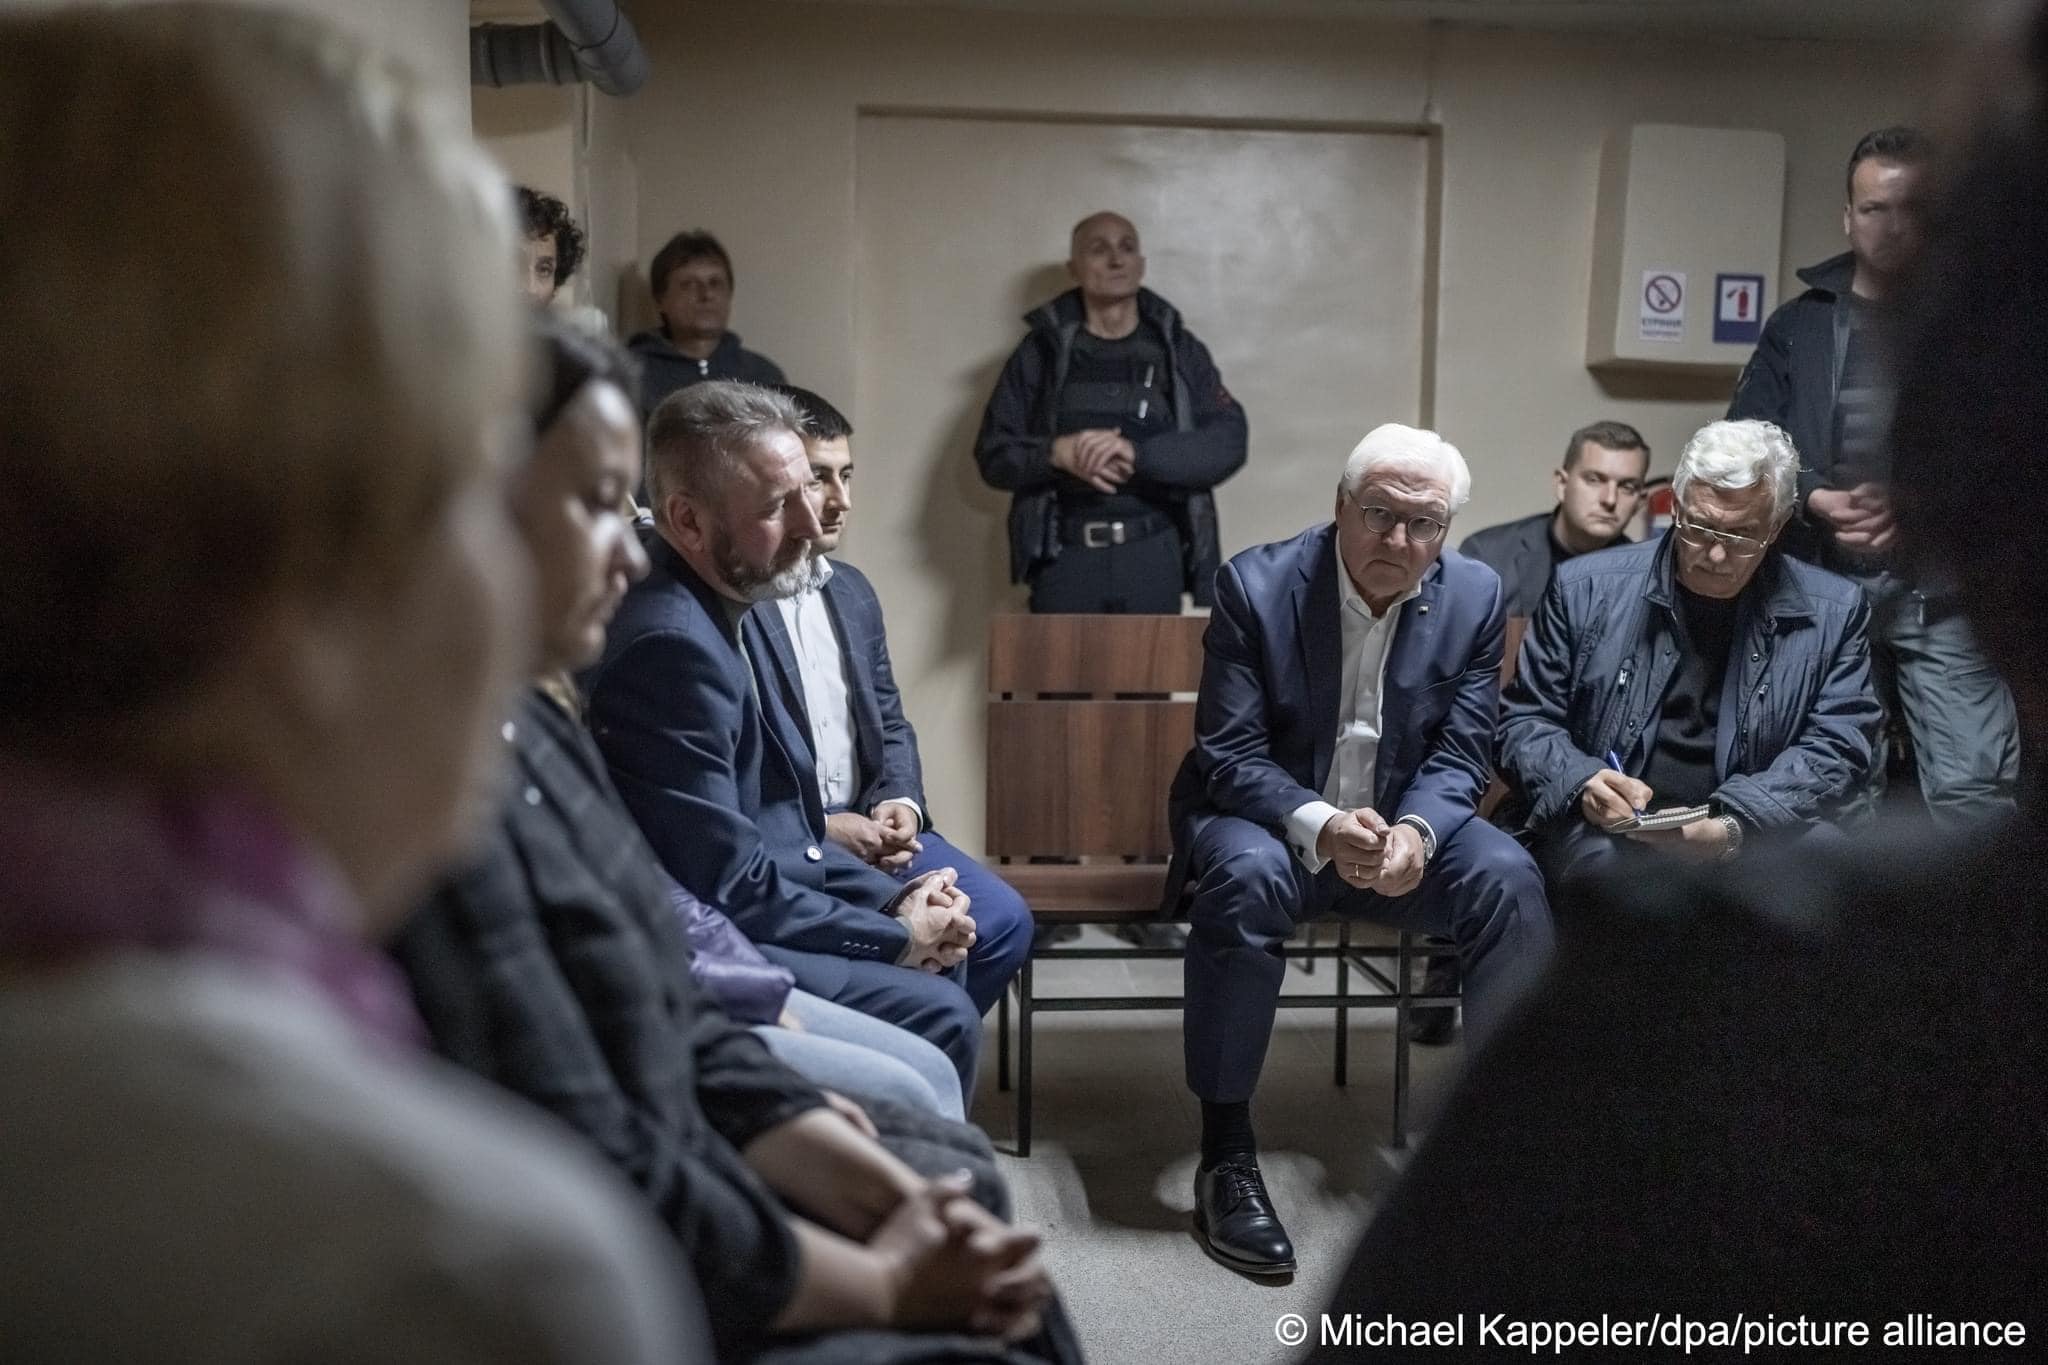 German President hid in shelter during his visit to Ukraine